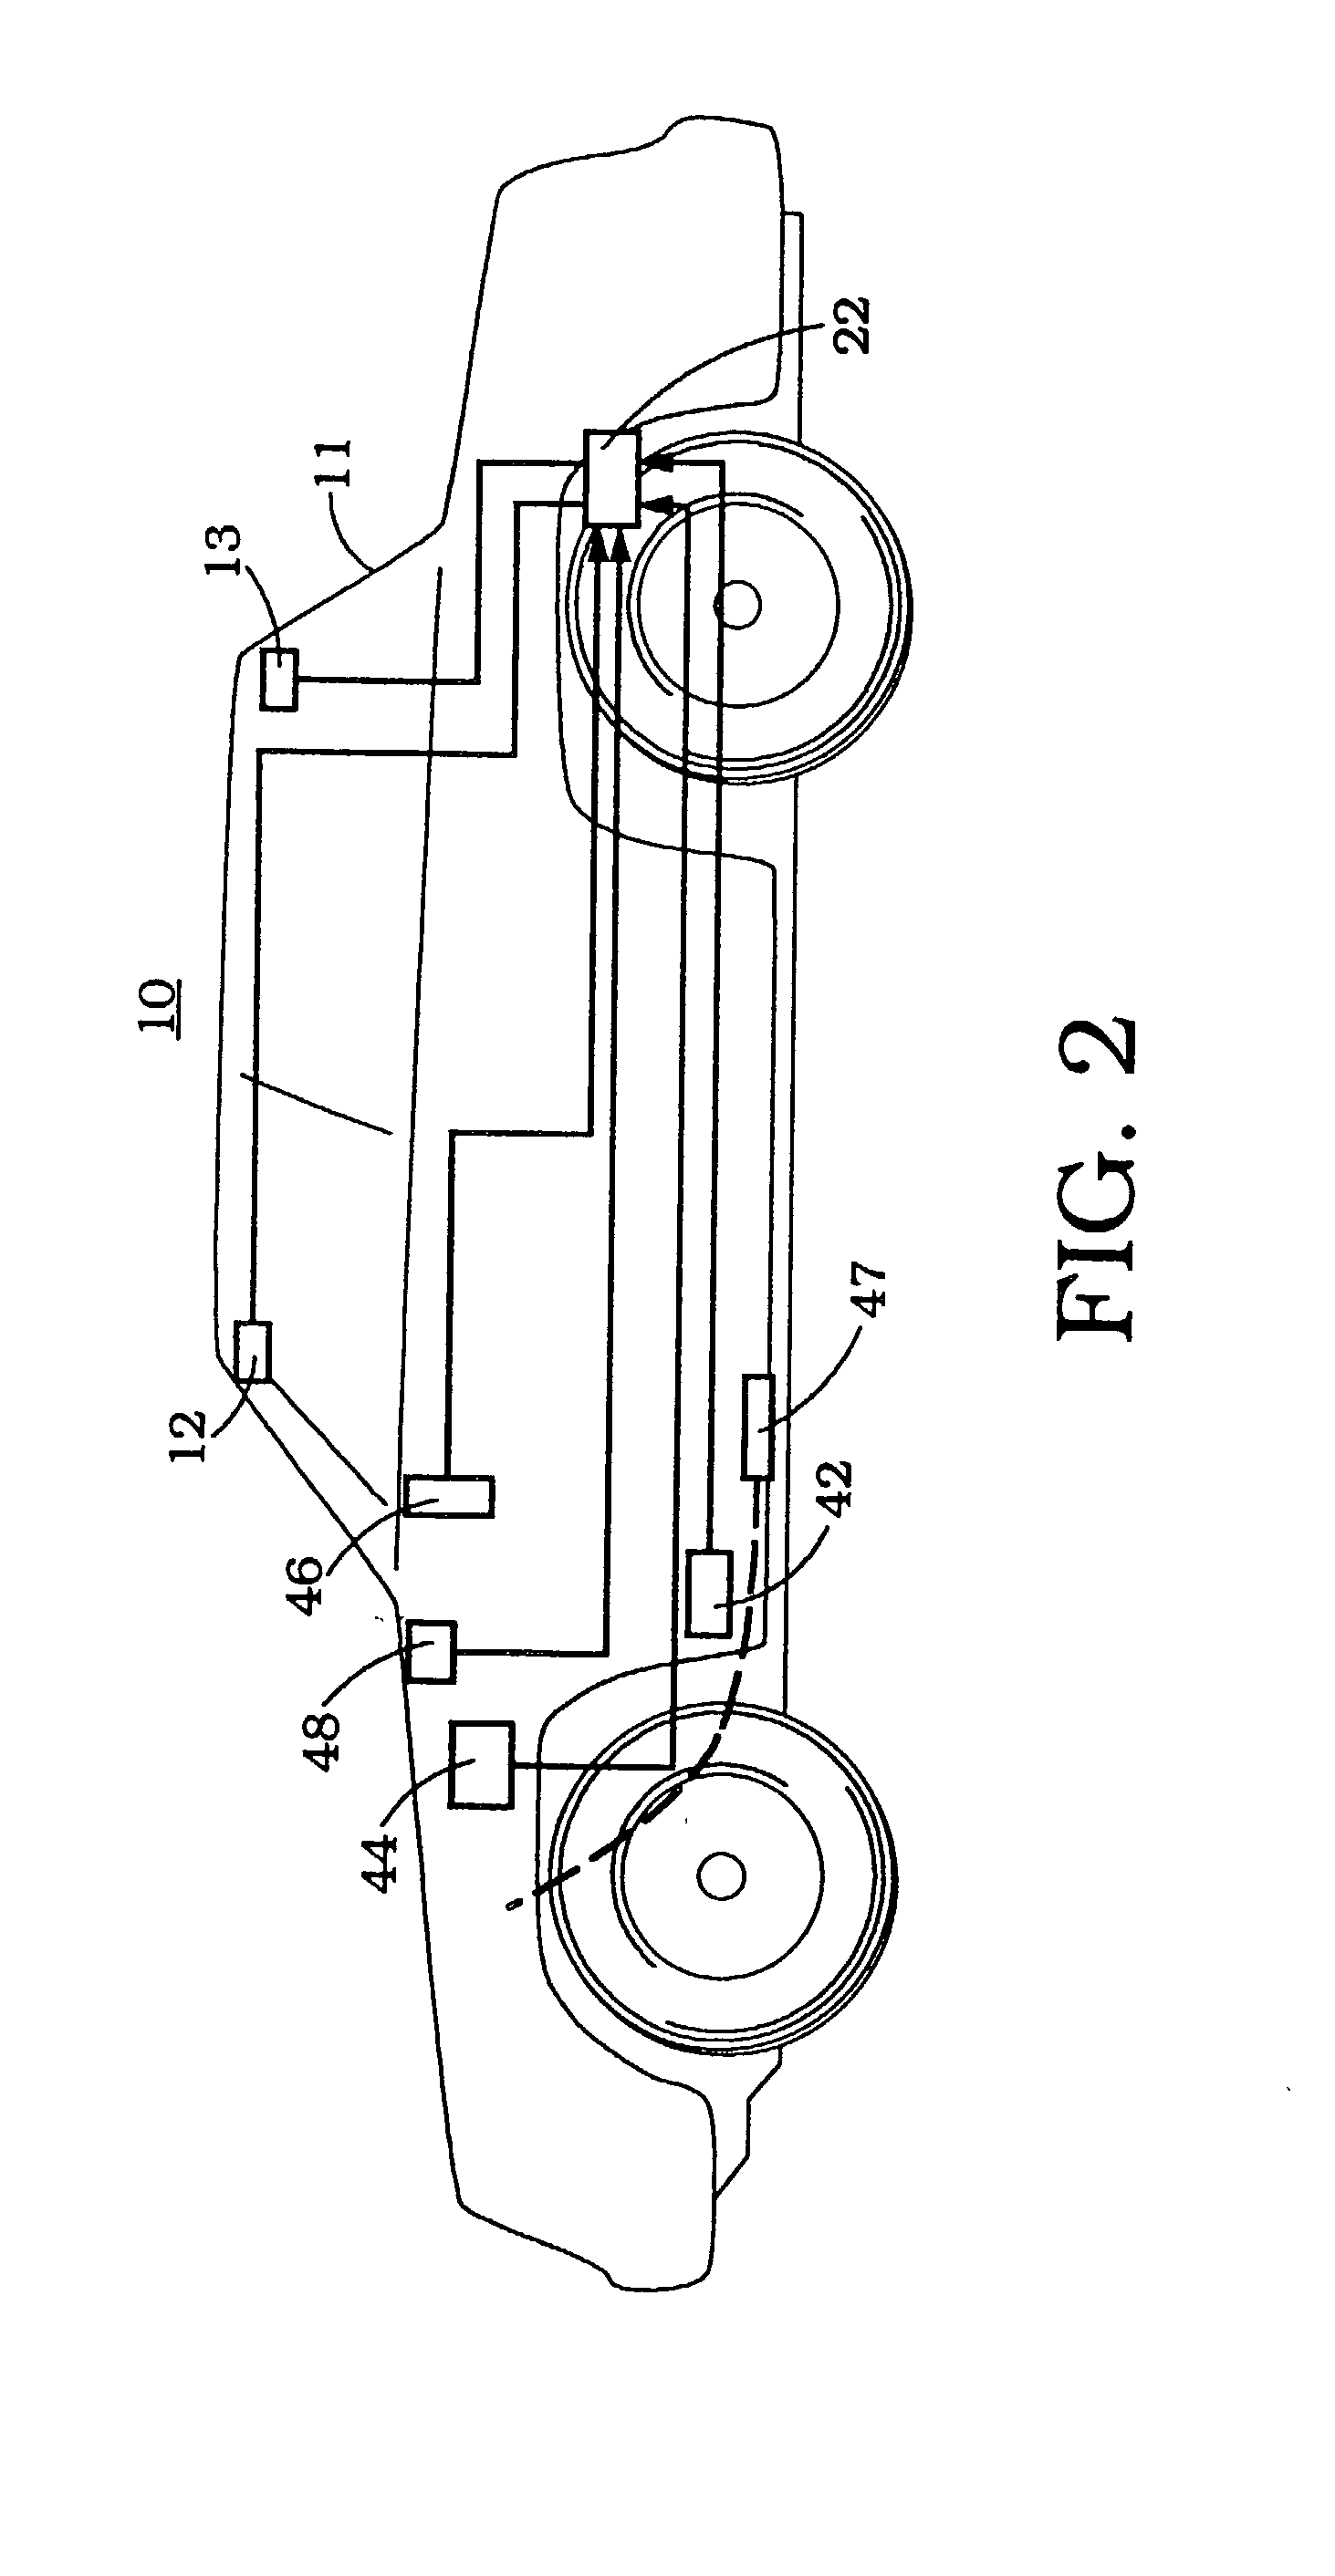 Secure, vehicle mounted, incident recording system